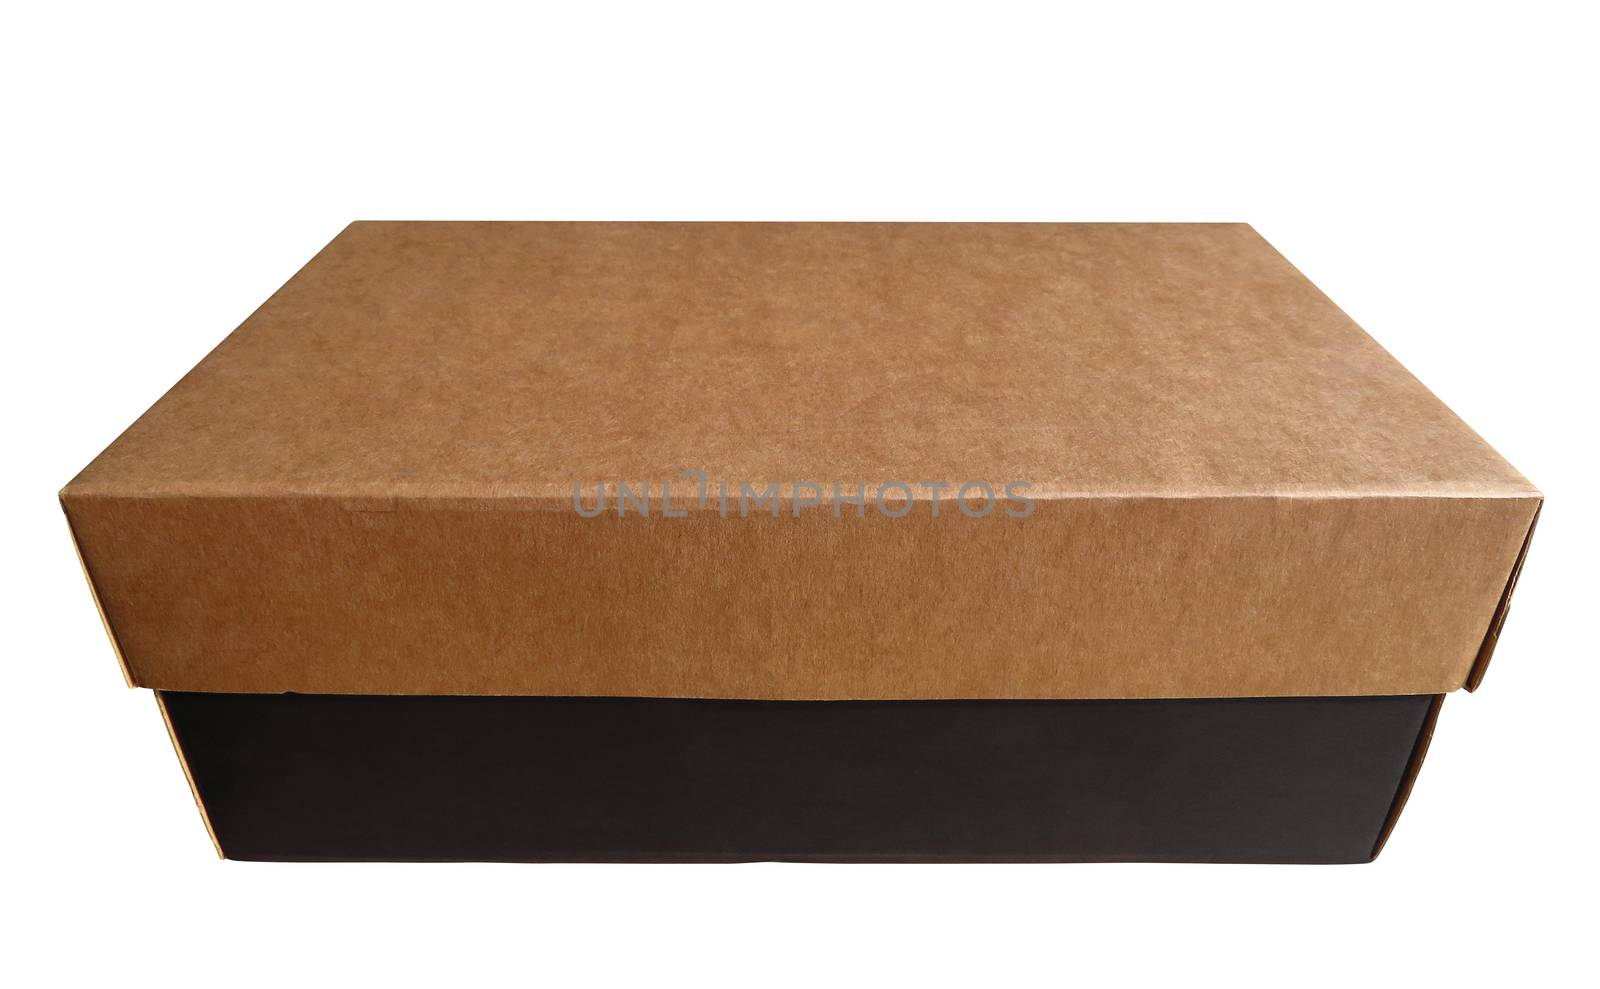 Cardboard box, isolated on white background. Clipping Path included.